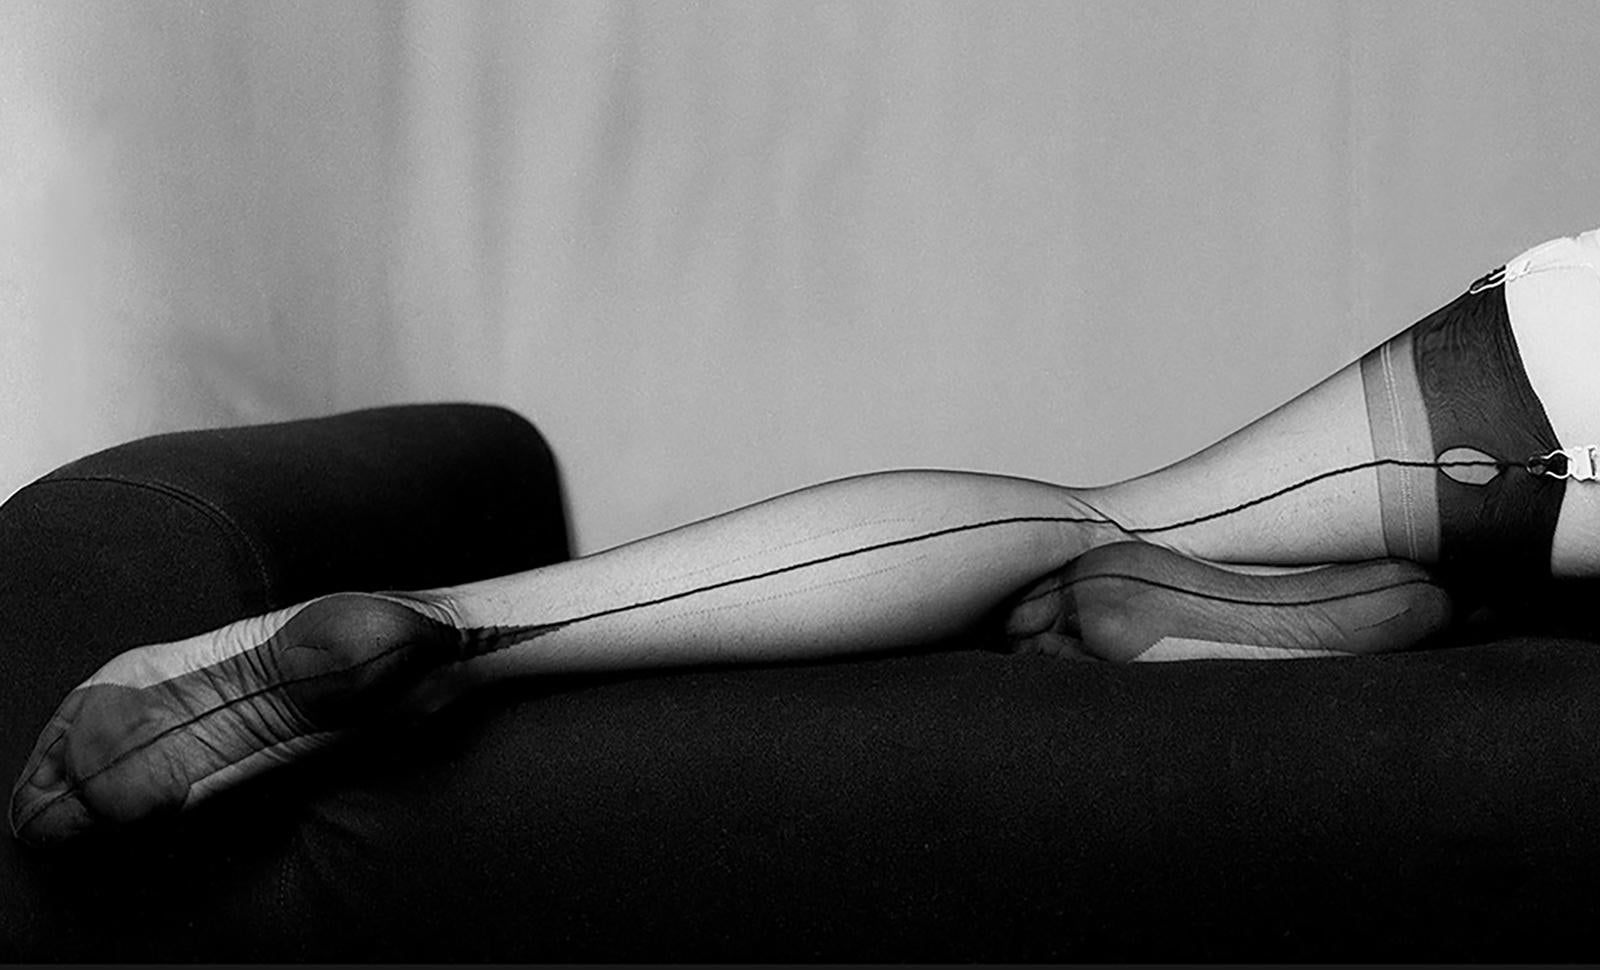 Repose - Signed limited edition archival pigment print, Contemporary and Sensual - Photograph by Geoff Halpin